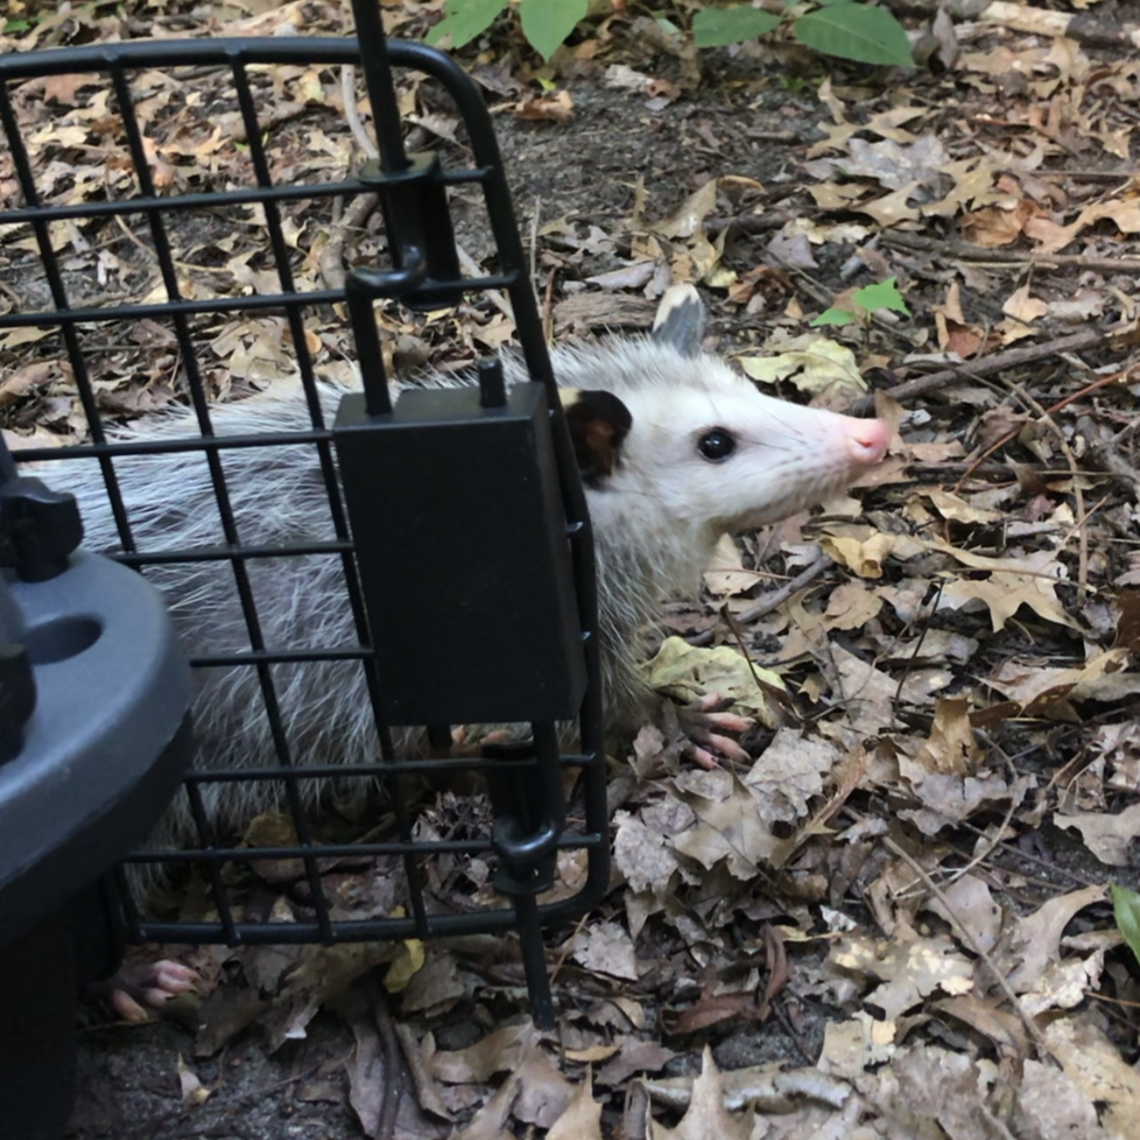 "I recently was lucky enough to have the amazing opportunity to release some opossums to their new home," Adams said.